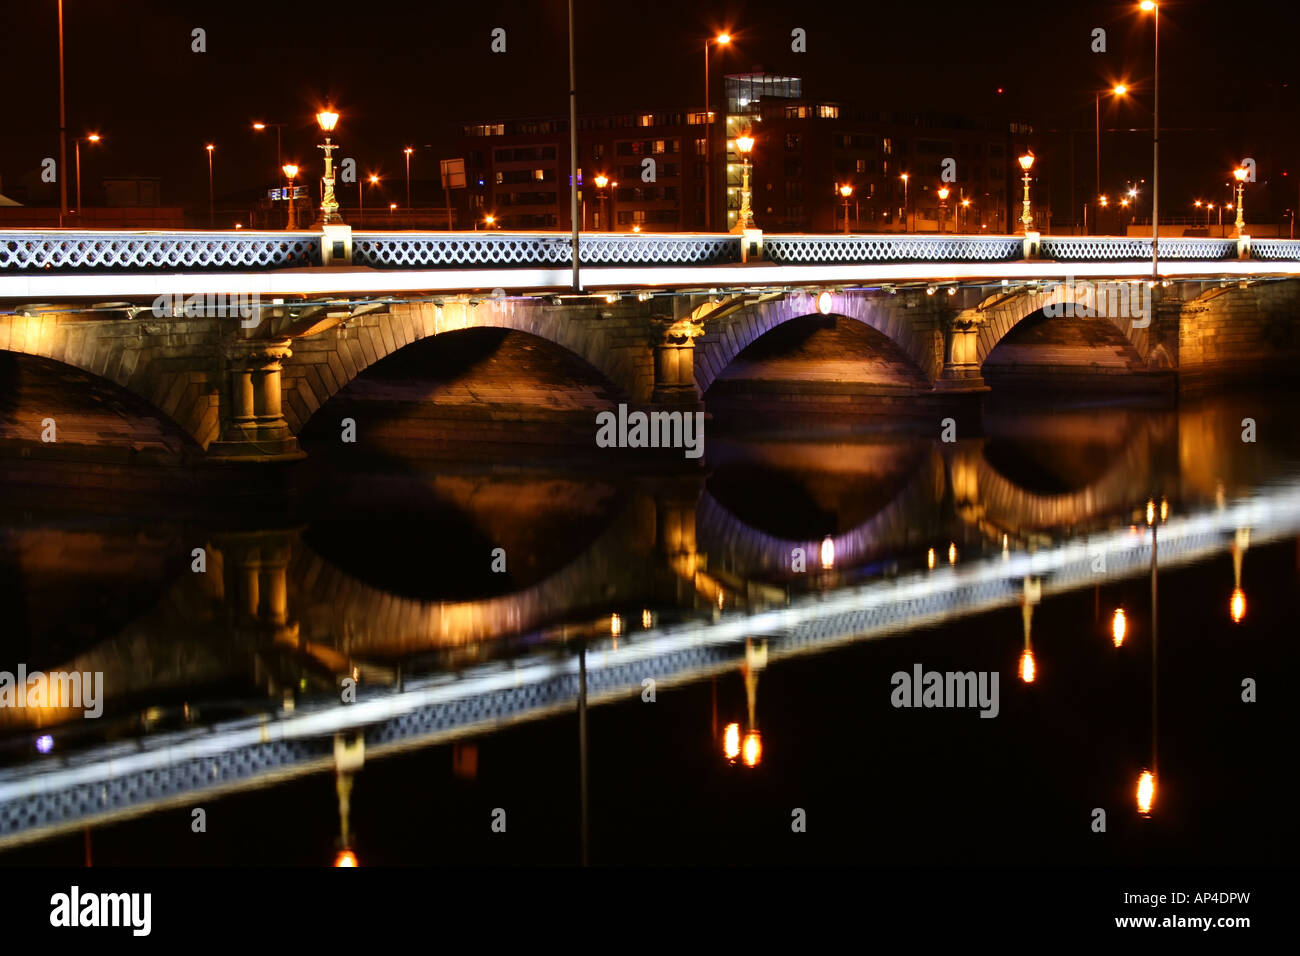 Queen's Bridge and the River Lagan illuminated at night in Belfast, Northern Ireland Stock Photo